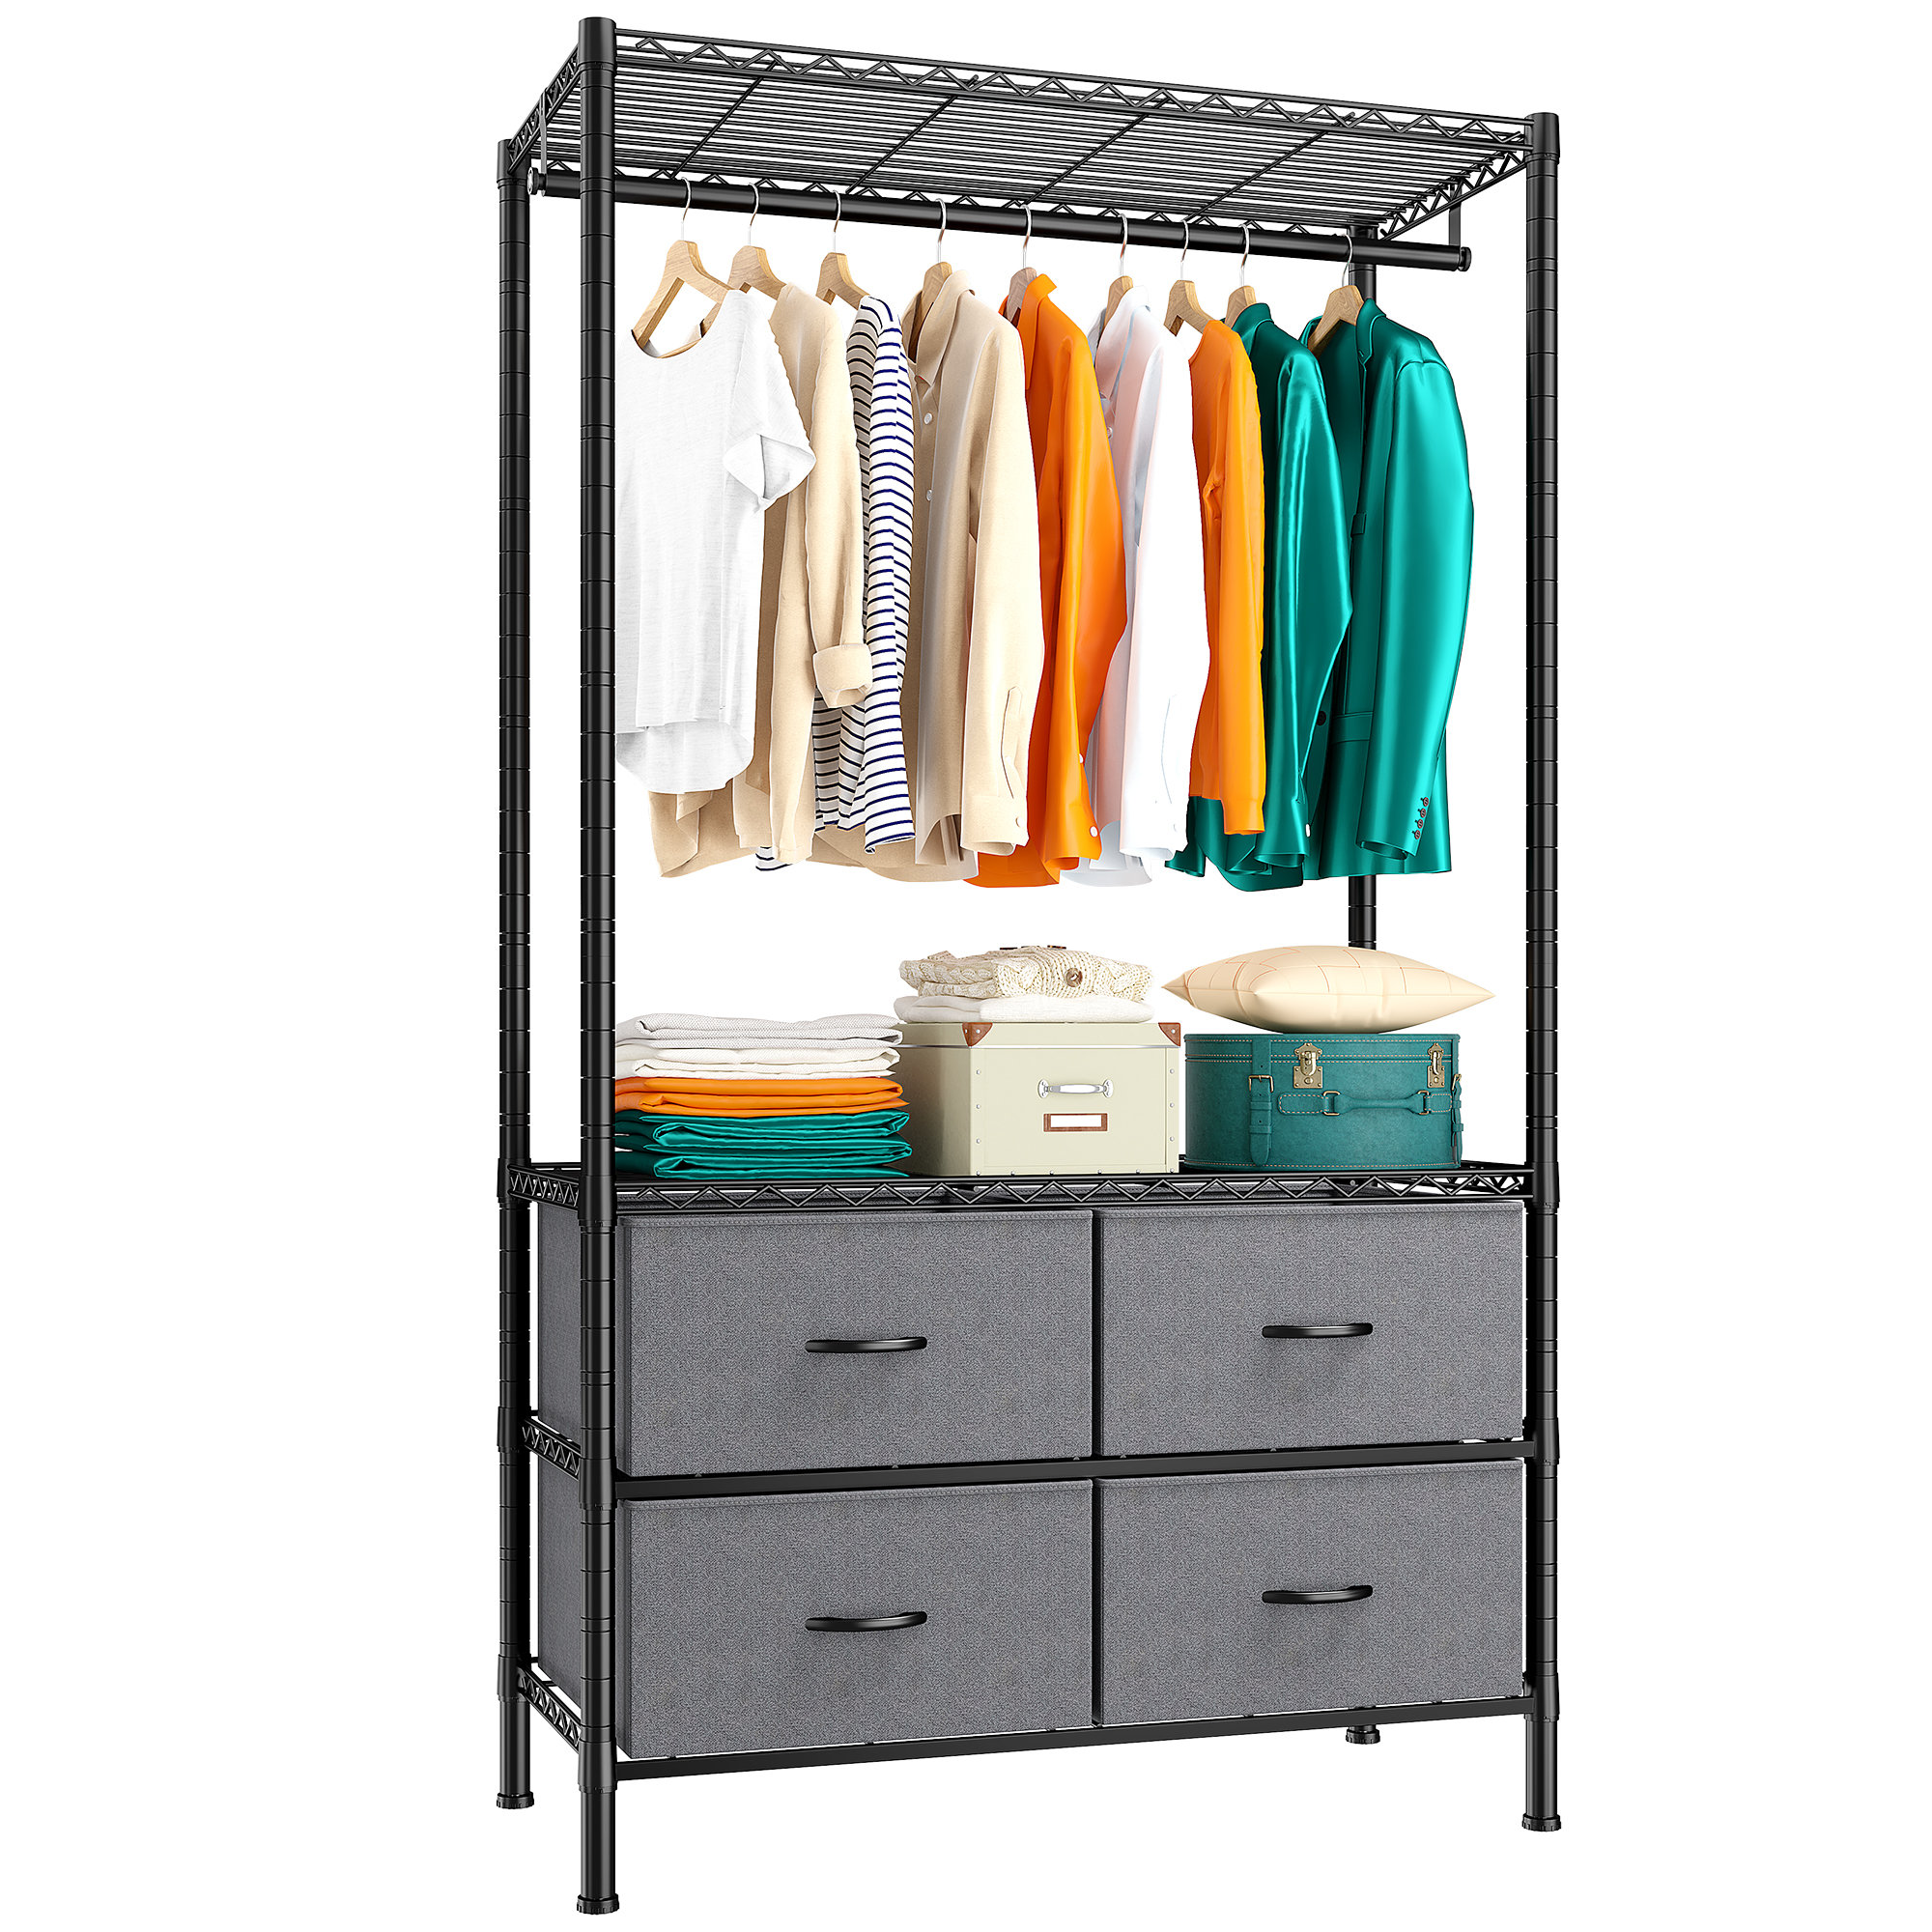 Clothing Rack with Drawers - Standalone Garment Rack to Hang